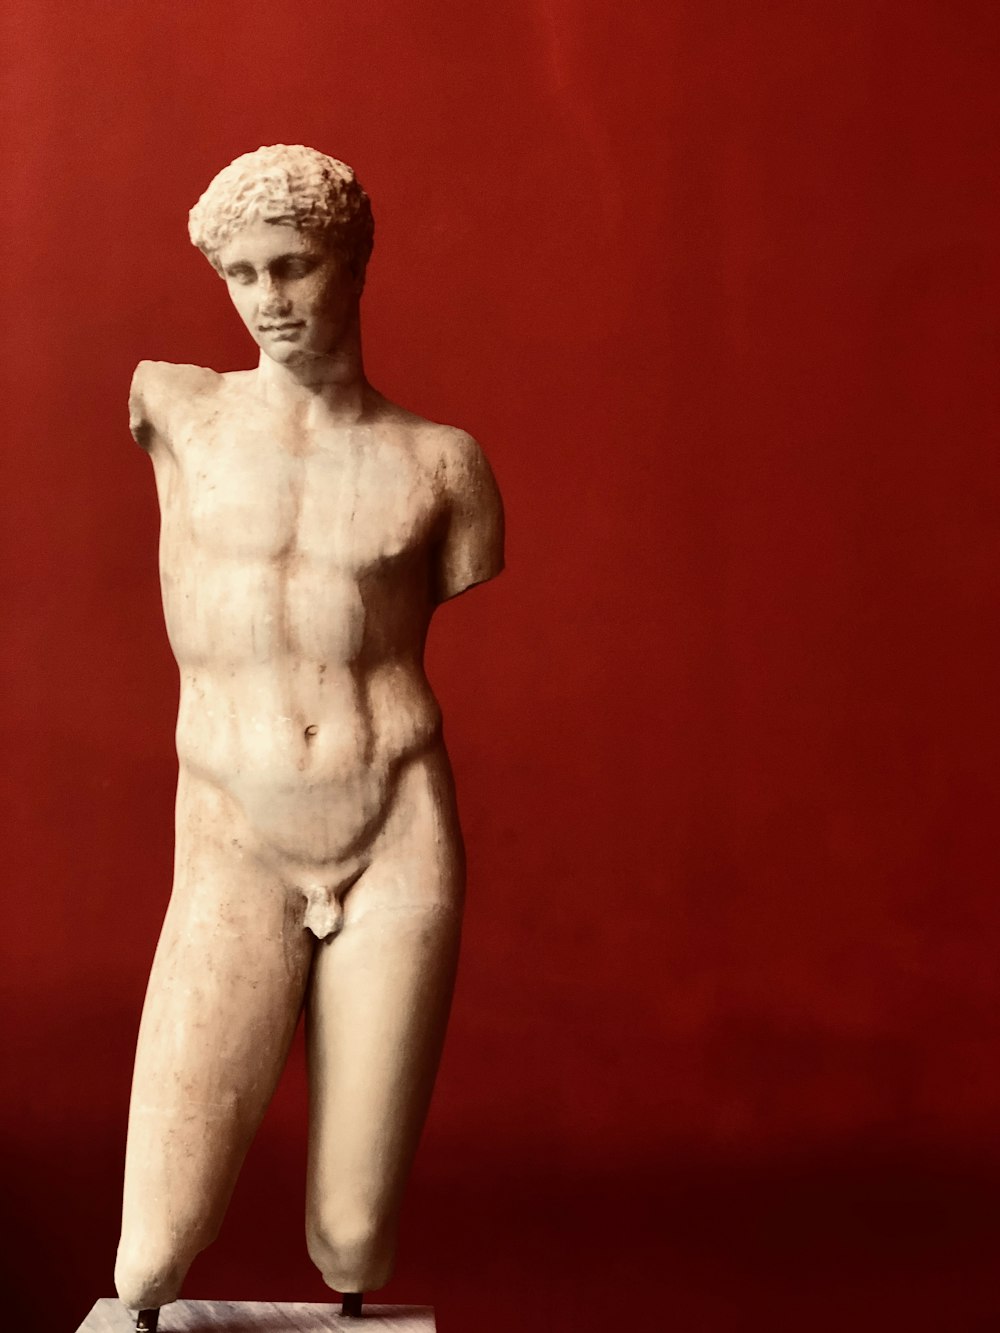 topless woman statue on red background